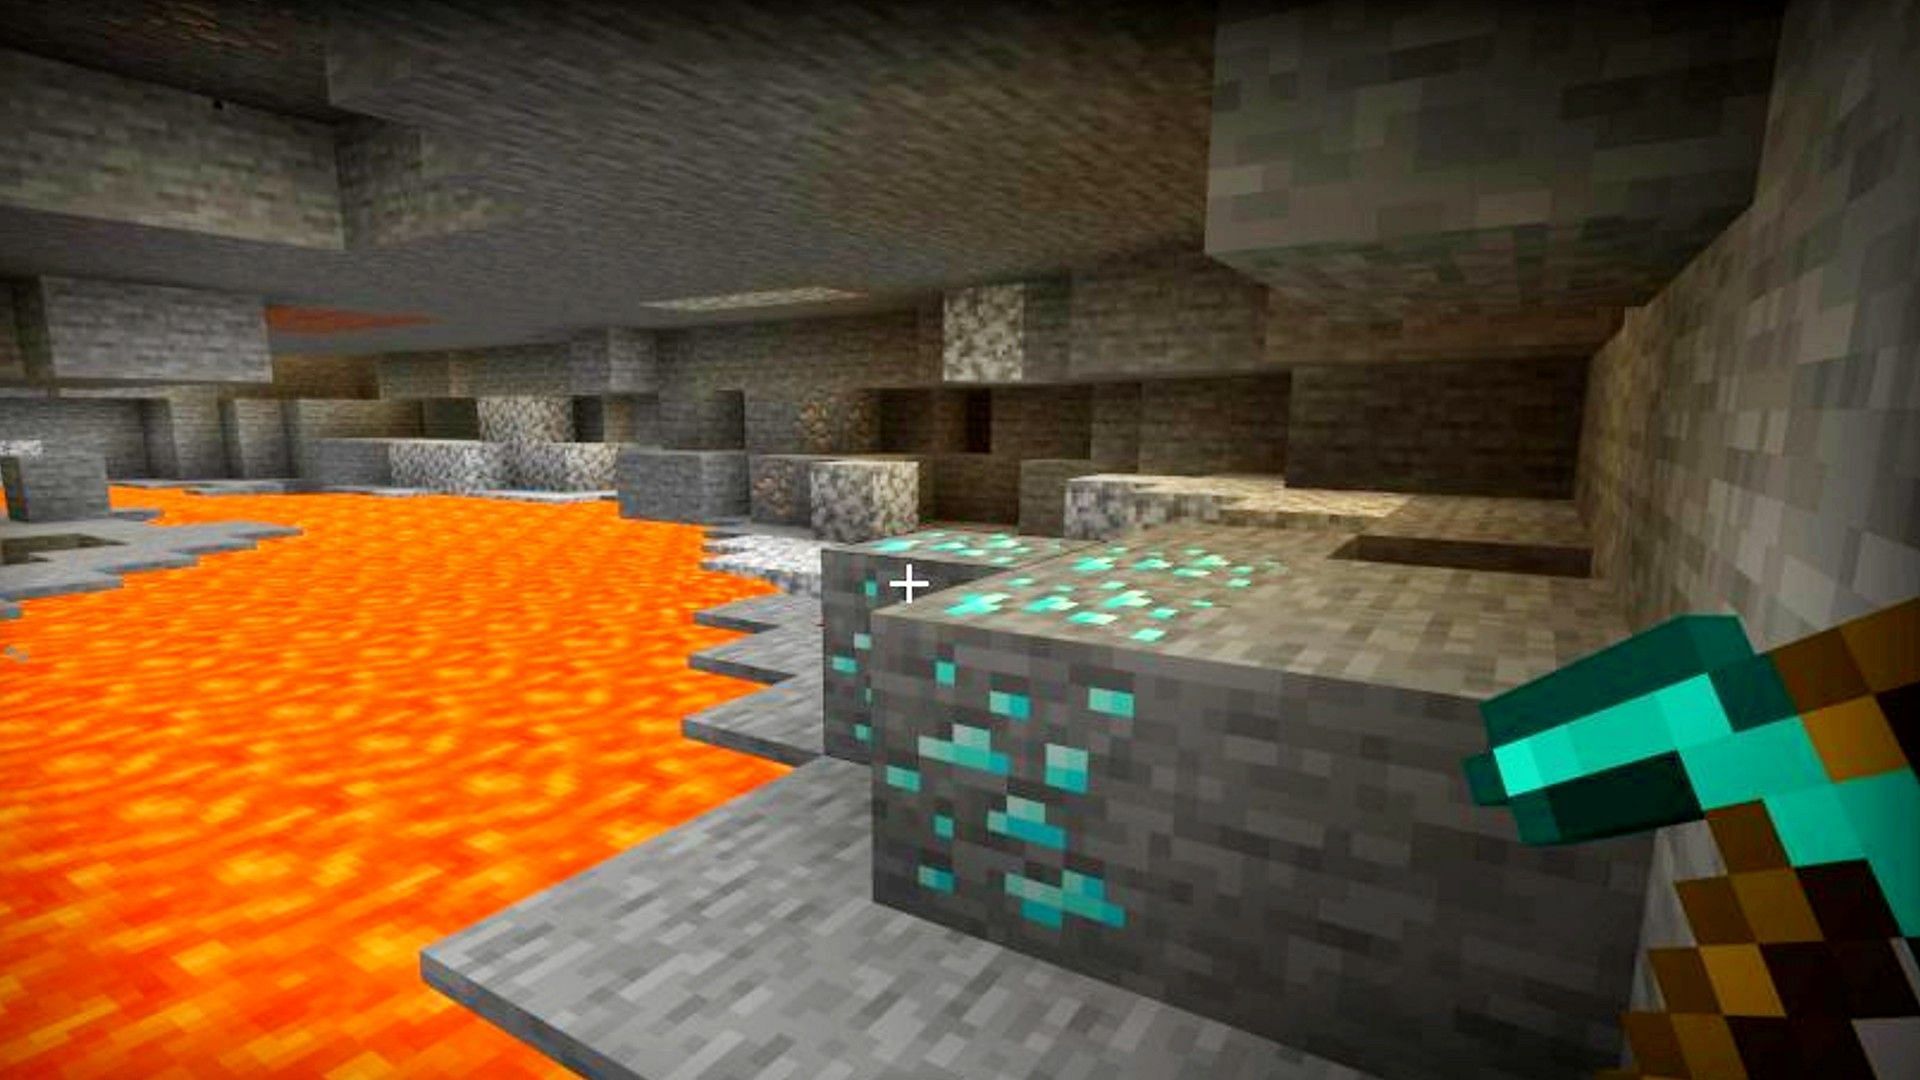 Diamonds are common deep below the surface in Minecraft (Image via Mojang)